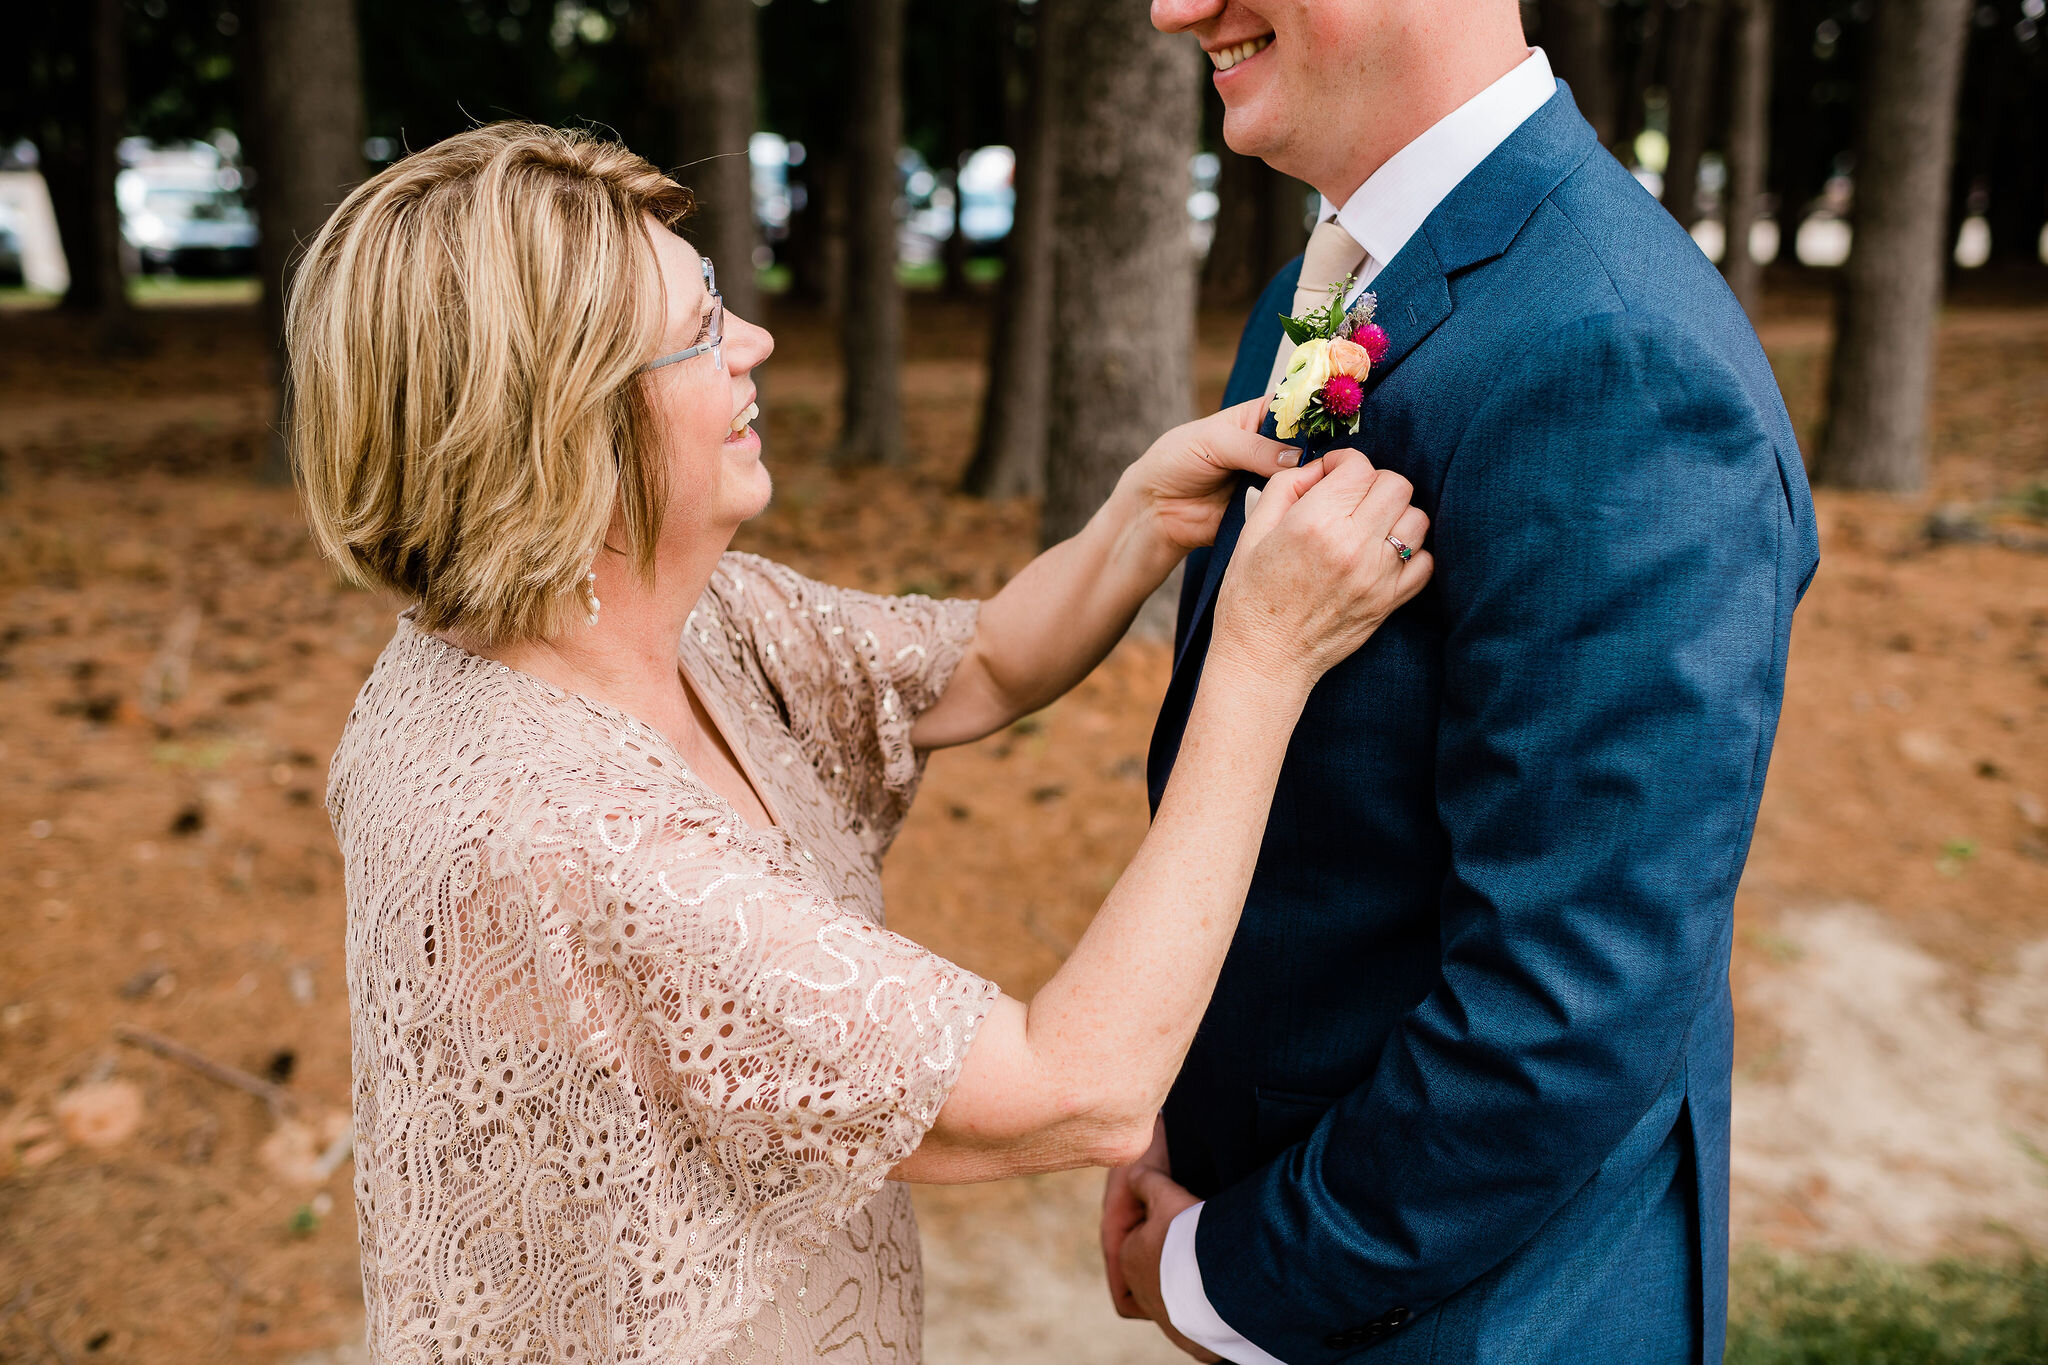 Mother of the groom pinning groom's boutonniere on